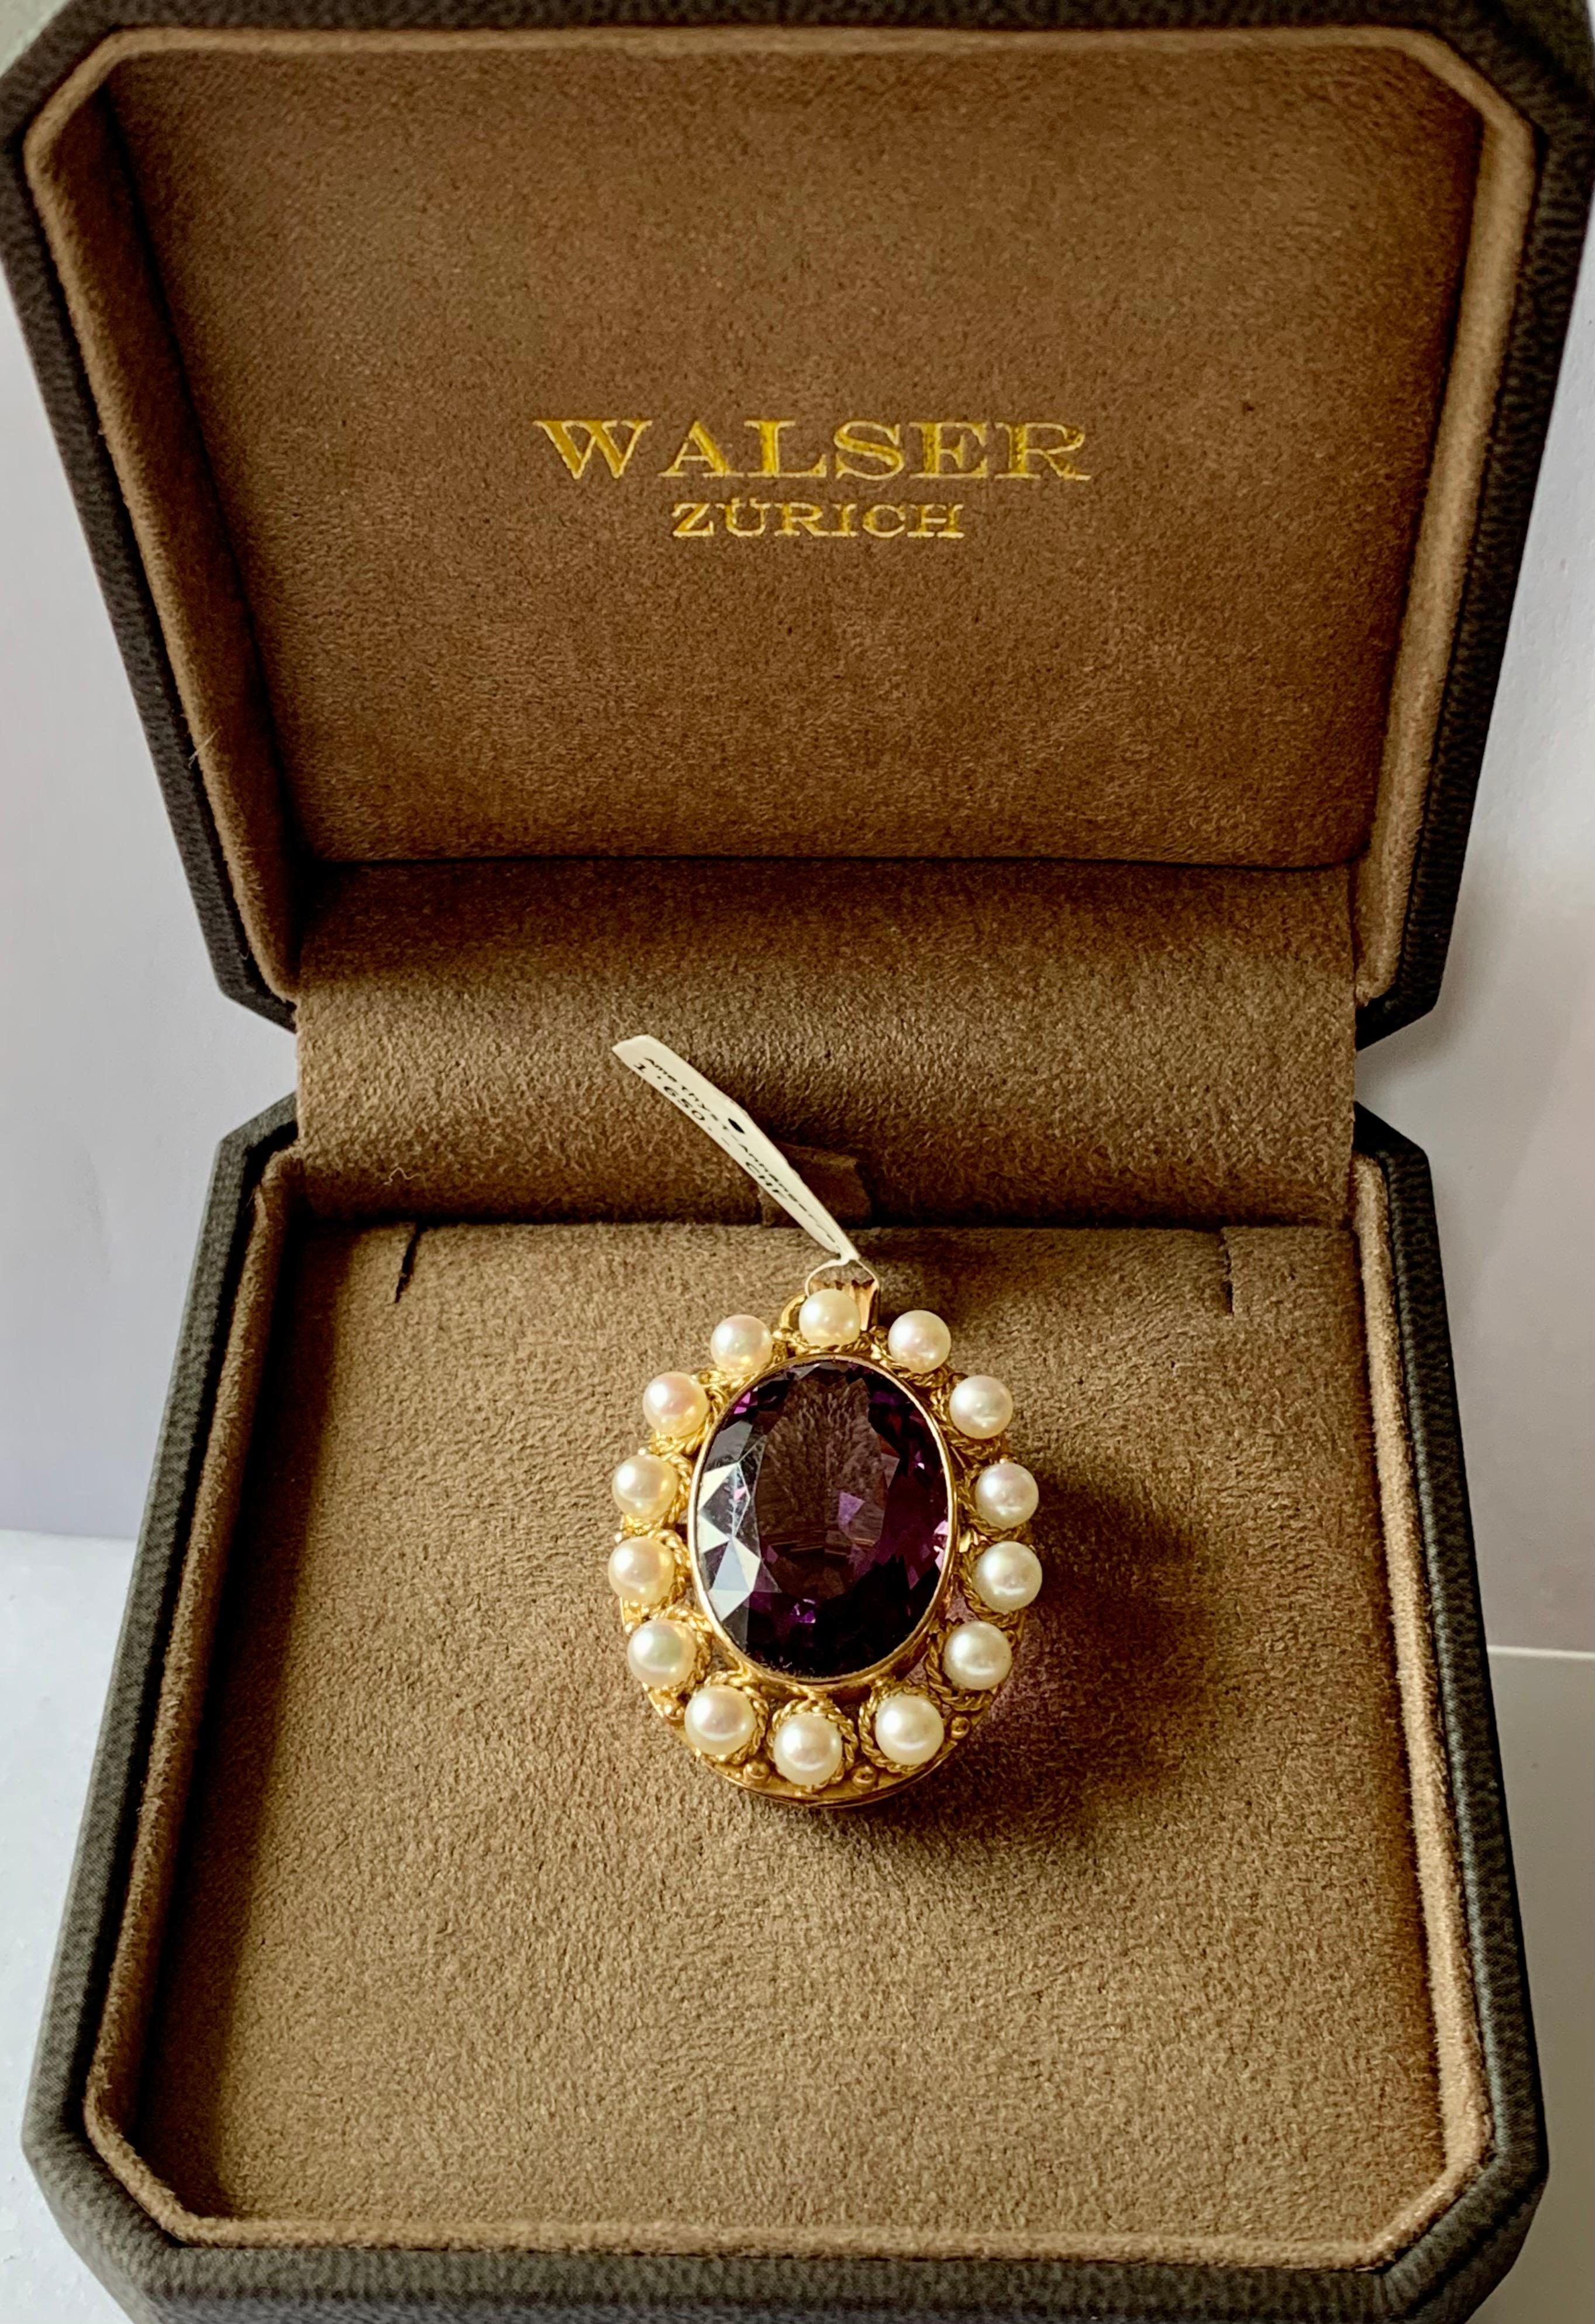 Vintage 18 K Yellow Gold Victorian Inspired Brooch/Pendant Amethyst and Pearls In Good Condition For Sale In Zurich, Zollstrasse